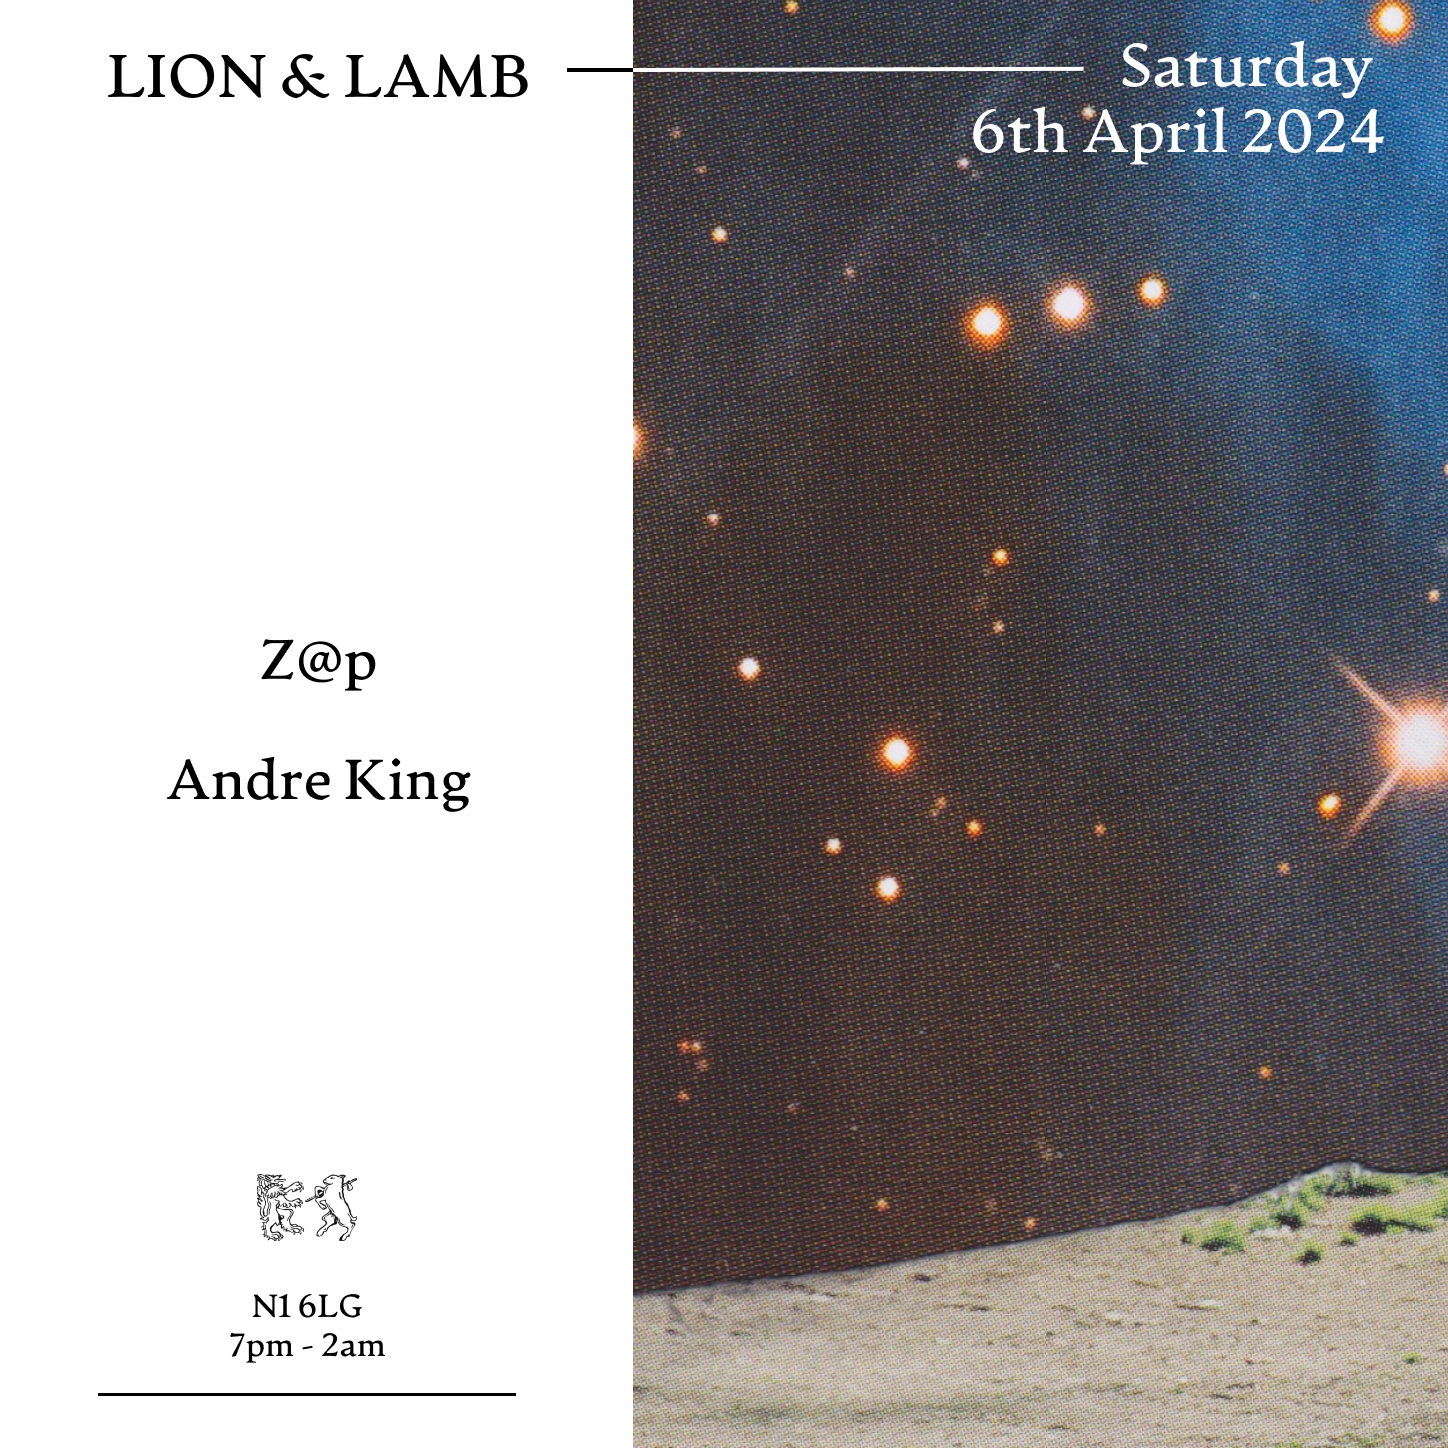 Lion & Lamb with Z@p + Andre King - フライヤー表